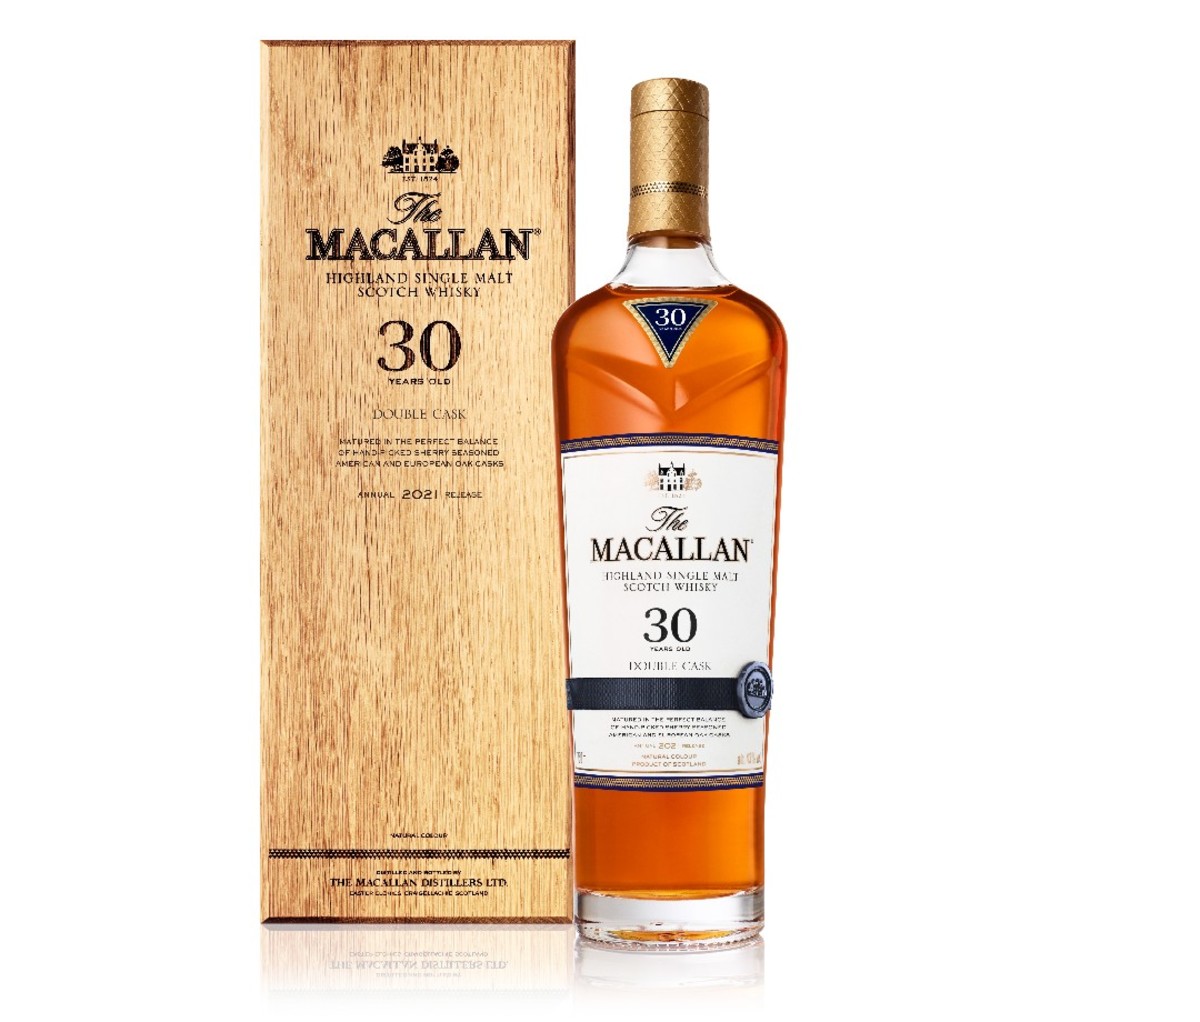 Bottle and wood container of Macallan Double Cask 30-Year-Old Single Malt Scotch Whisky